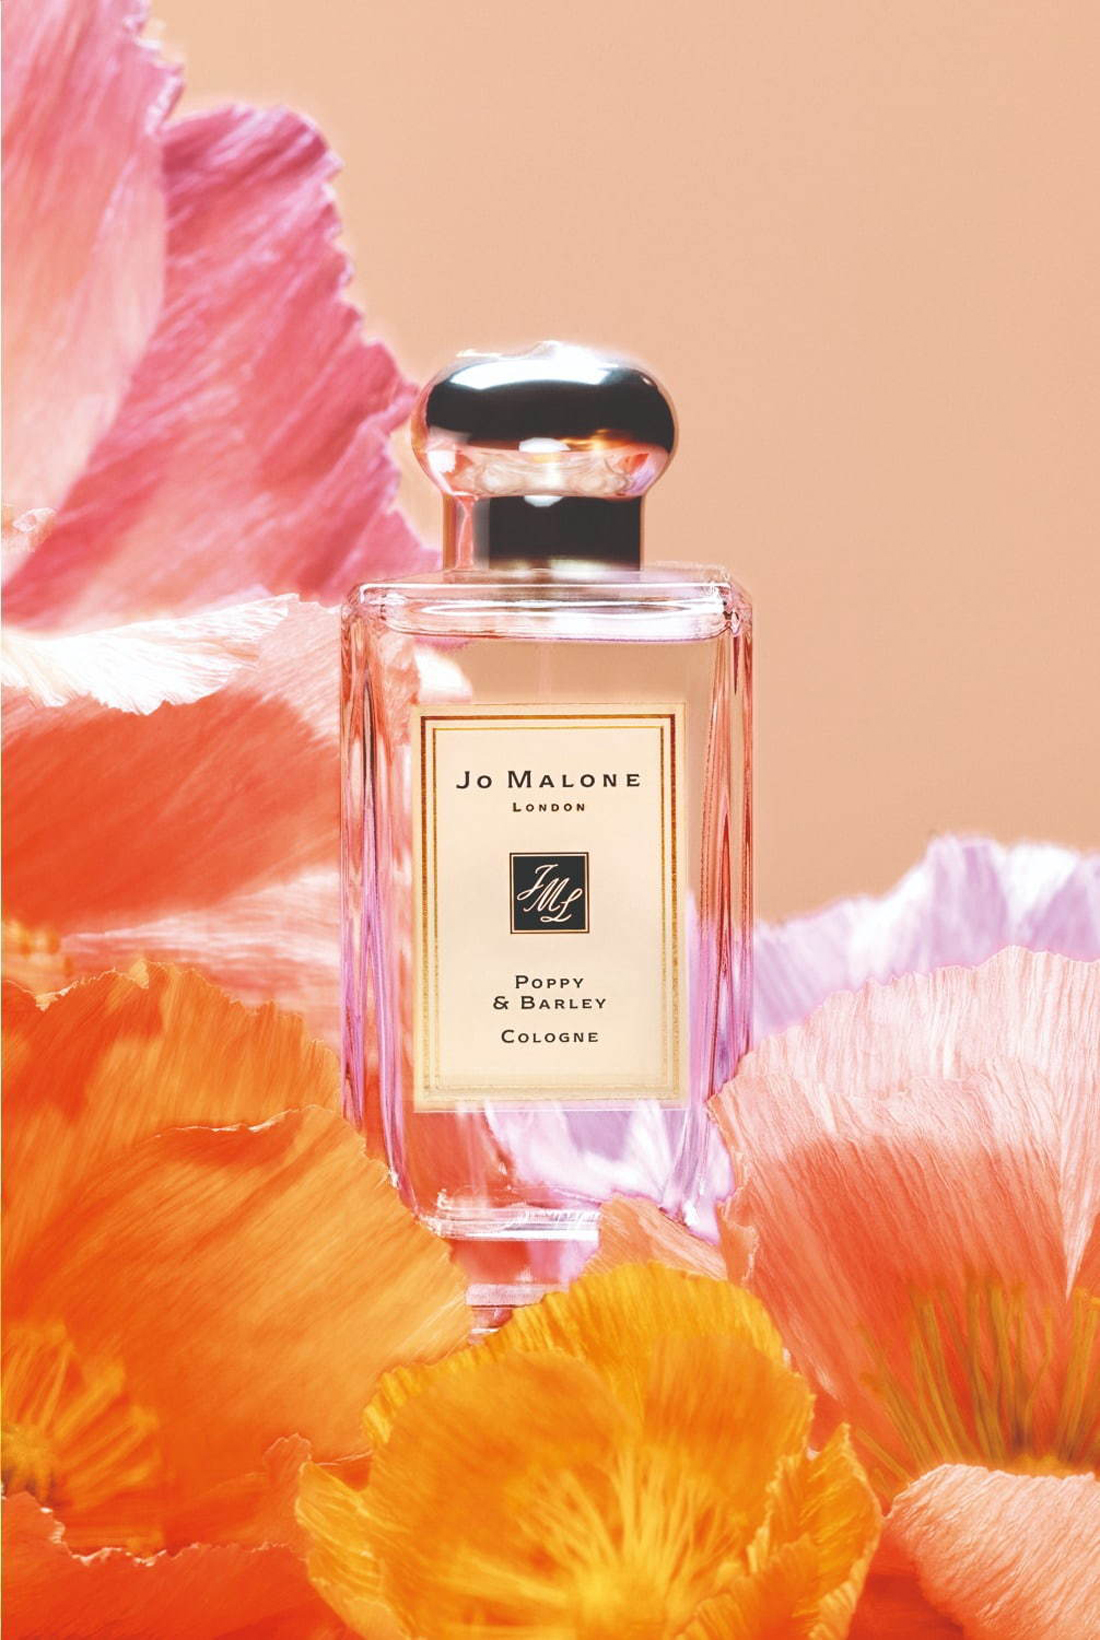 Poppy & Barley Jo Malone London perfume - a new fragrance for women and